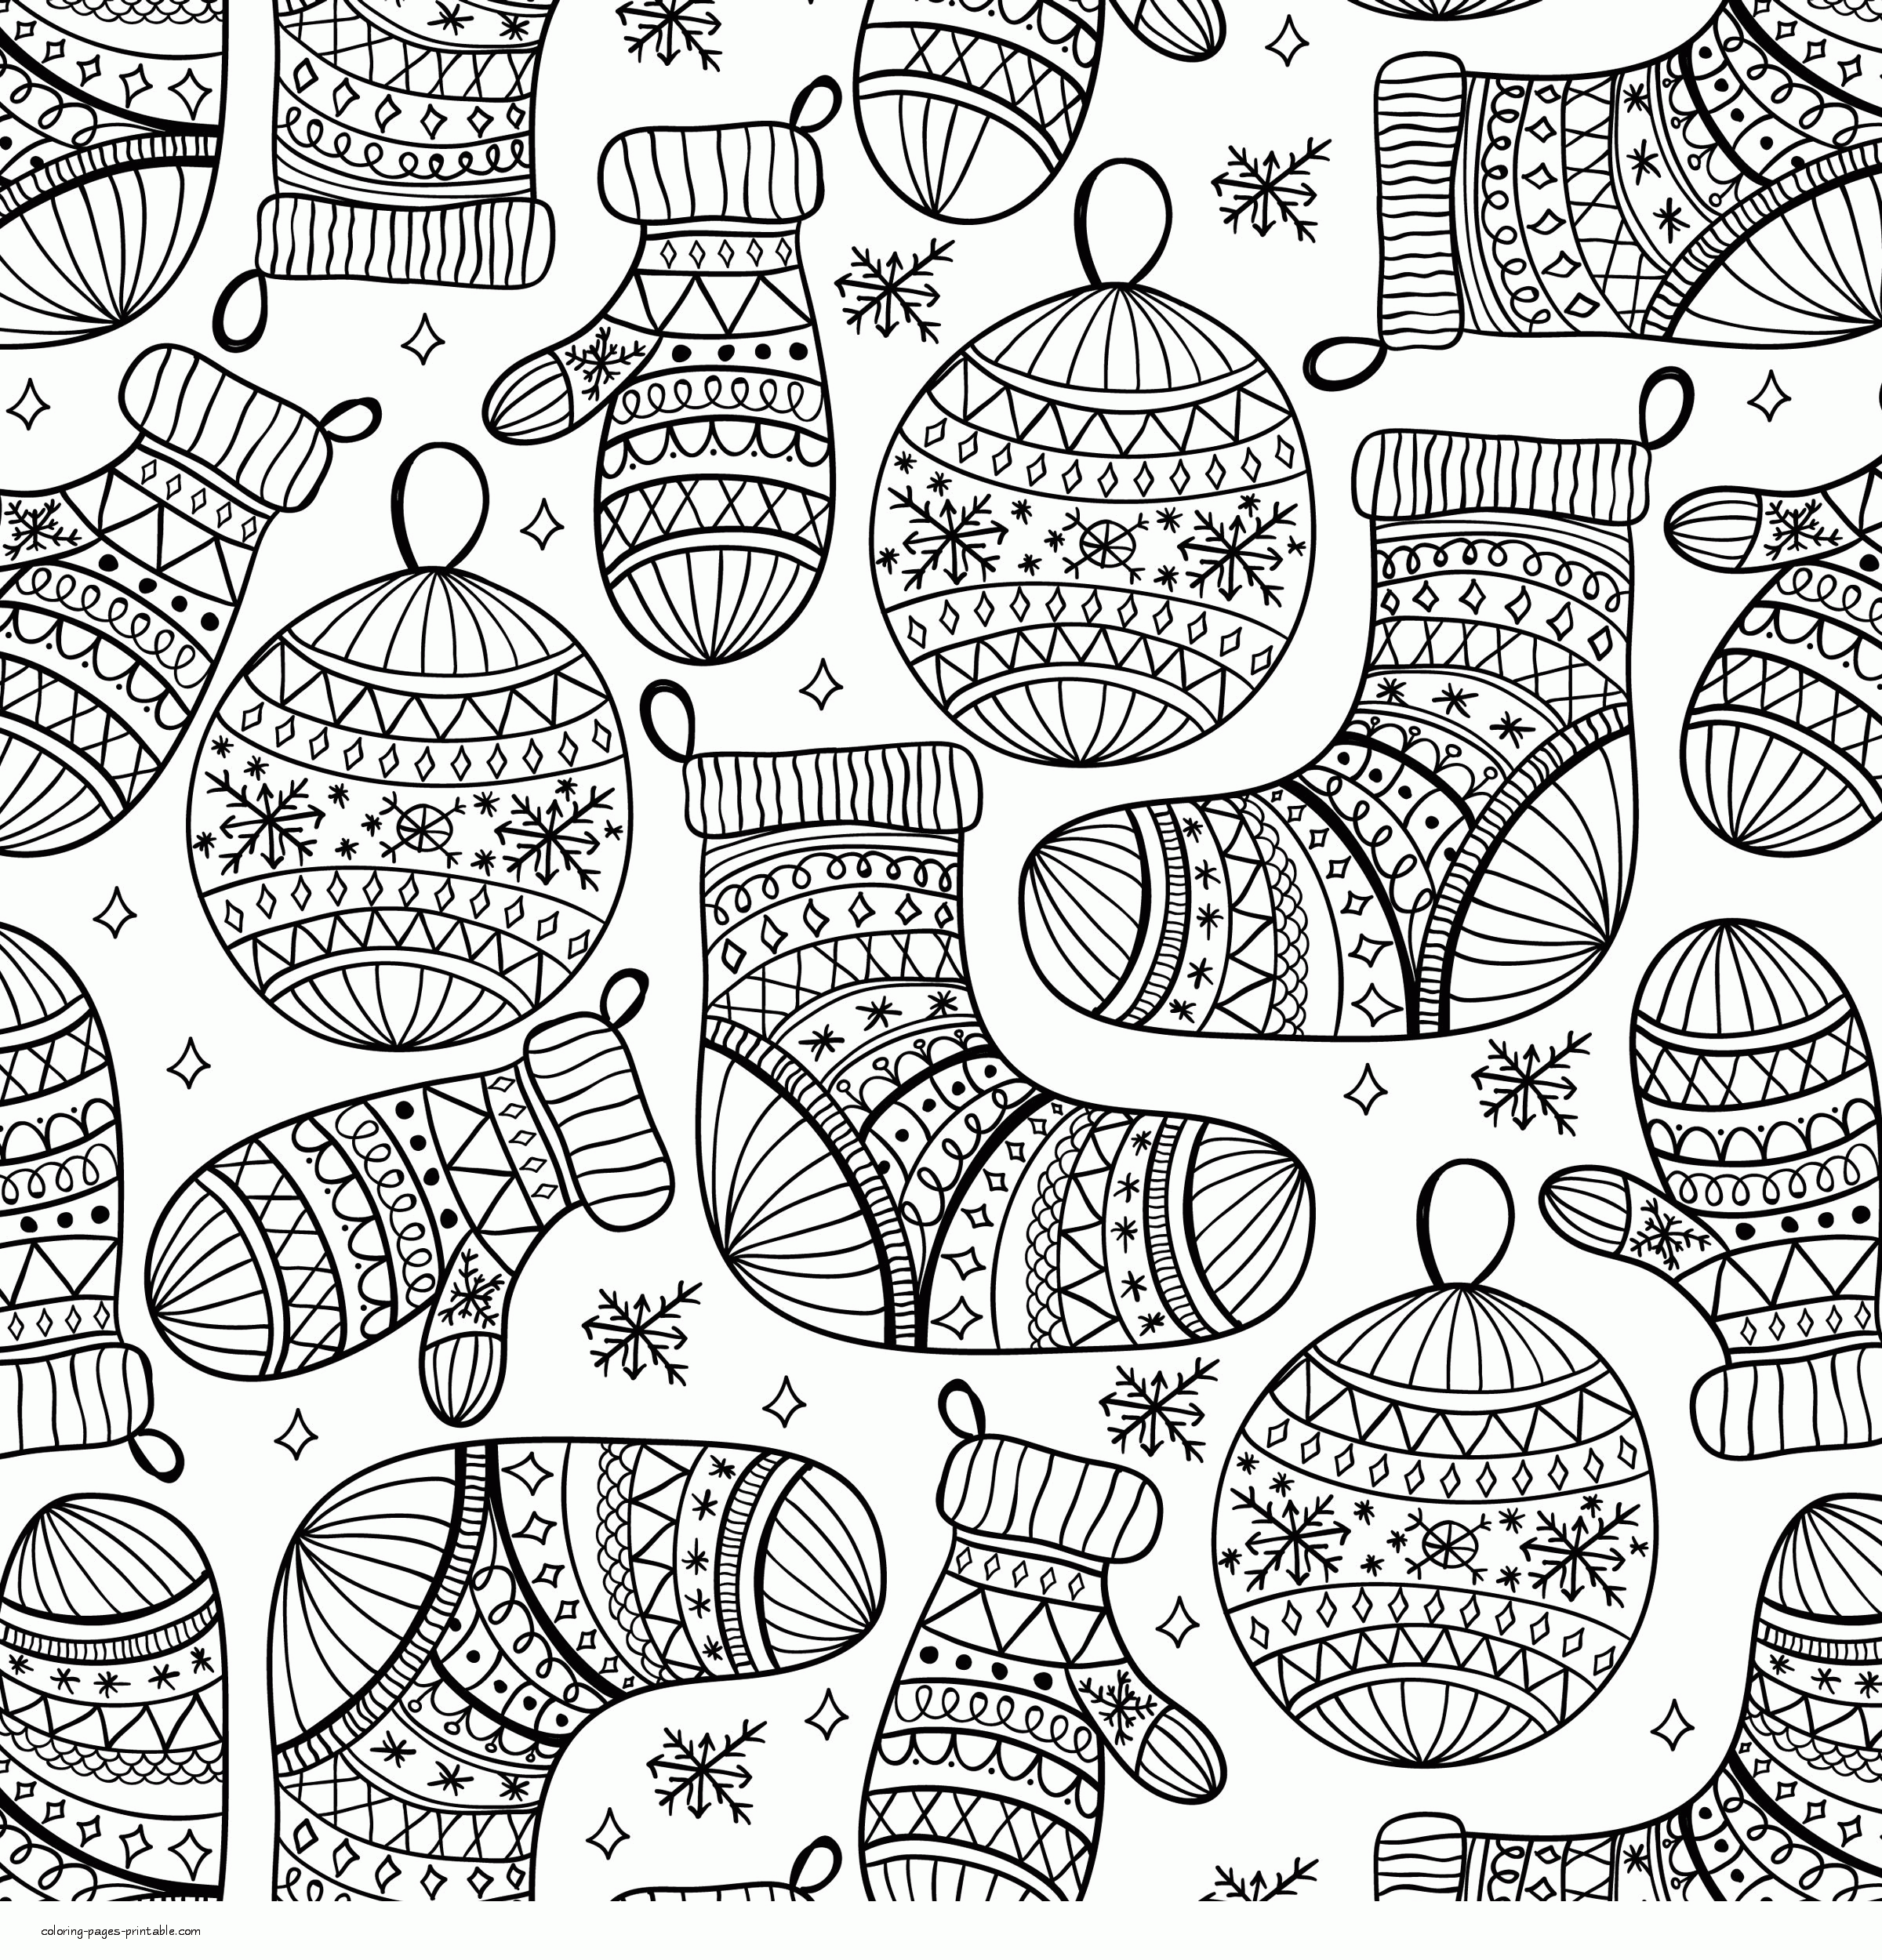 Free Christmas Coloring Pages To Print For Adults    COLORING ...